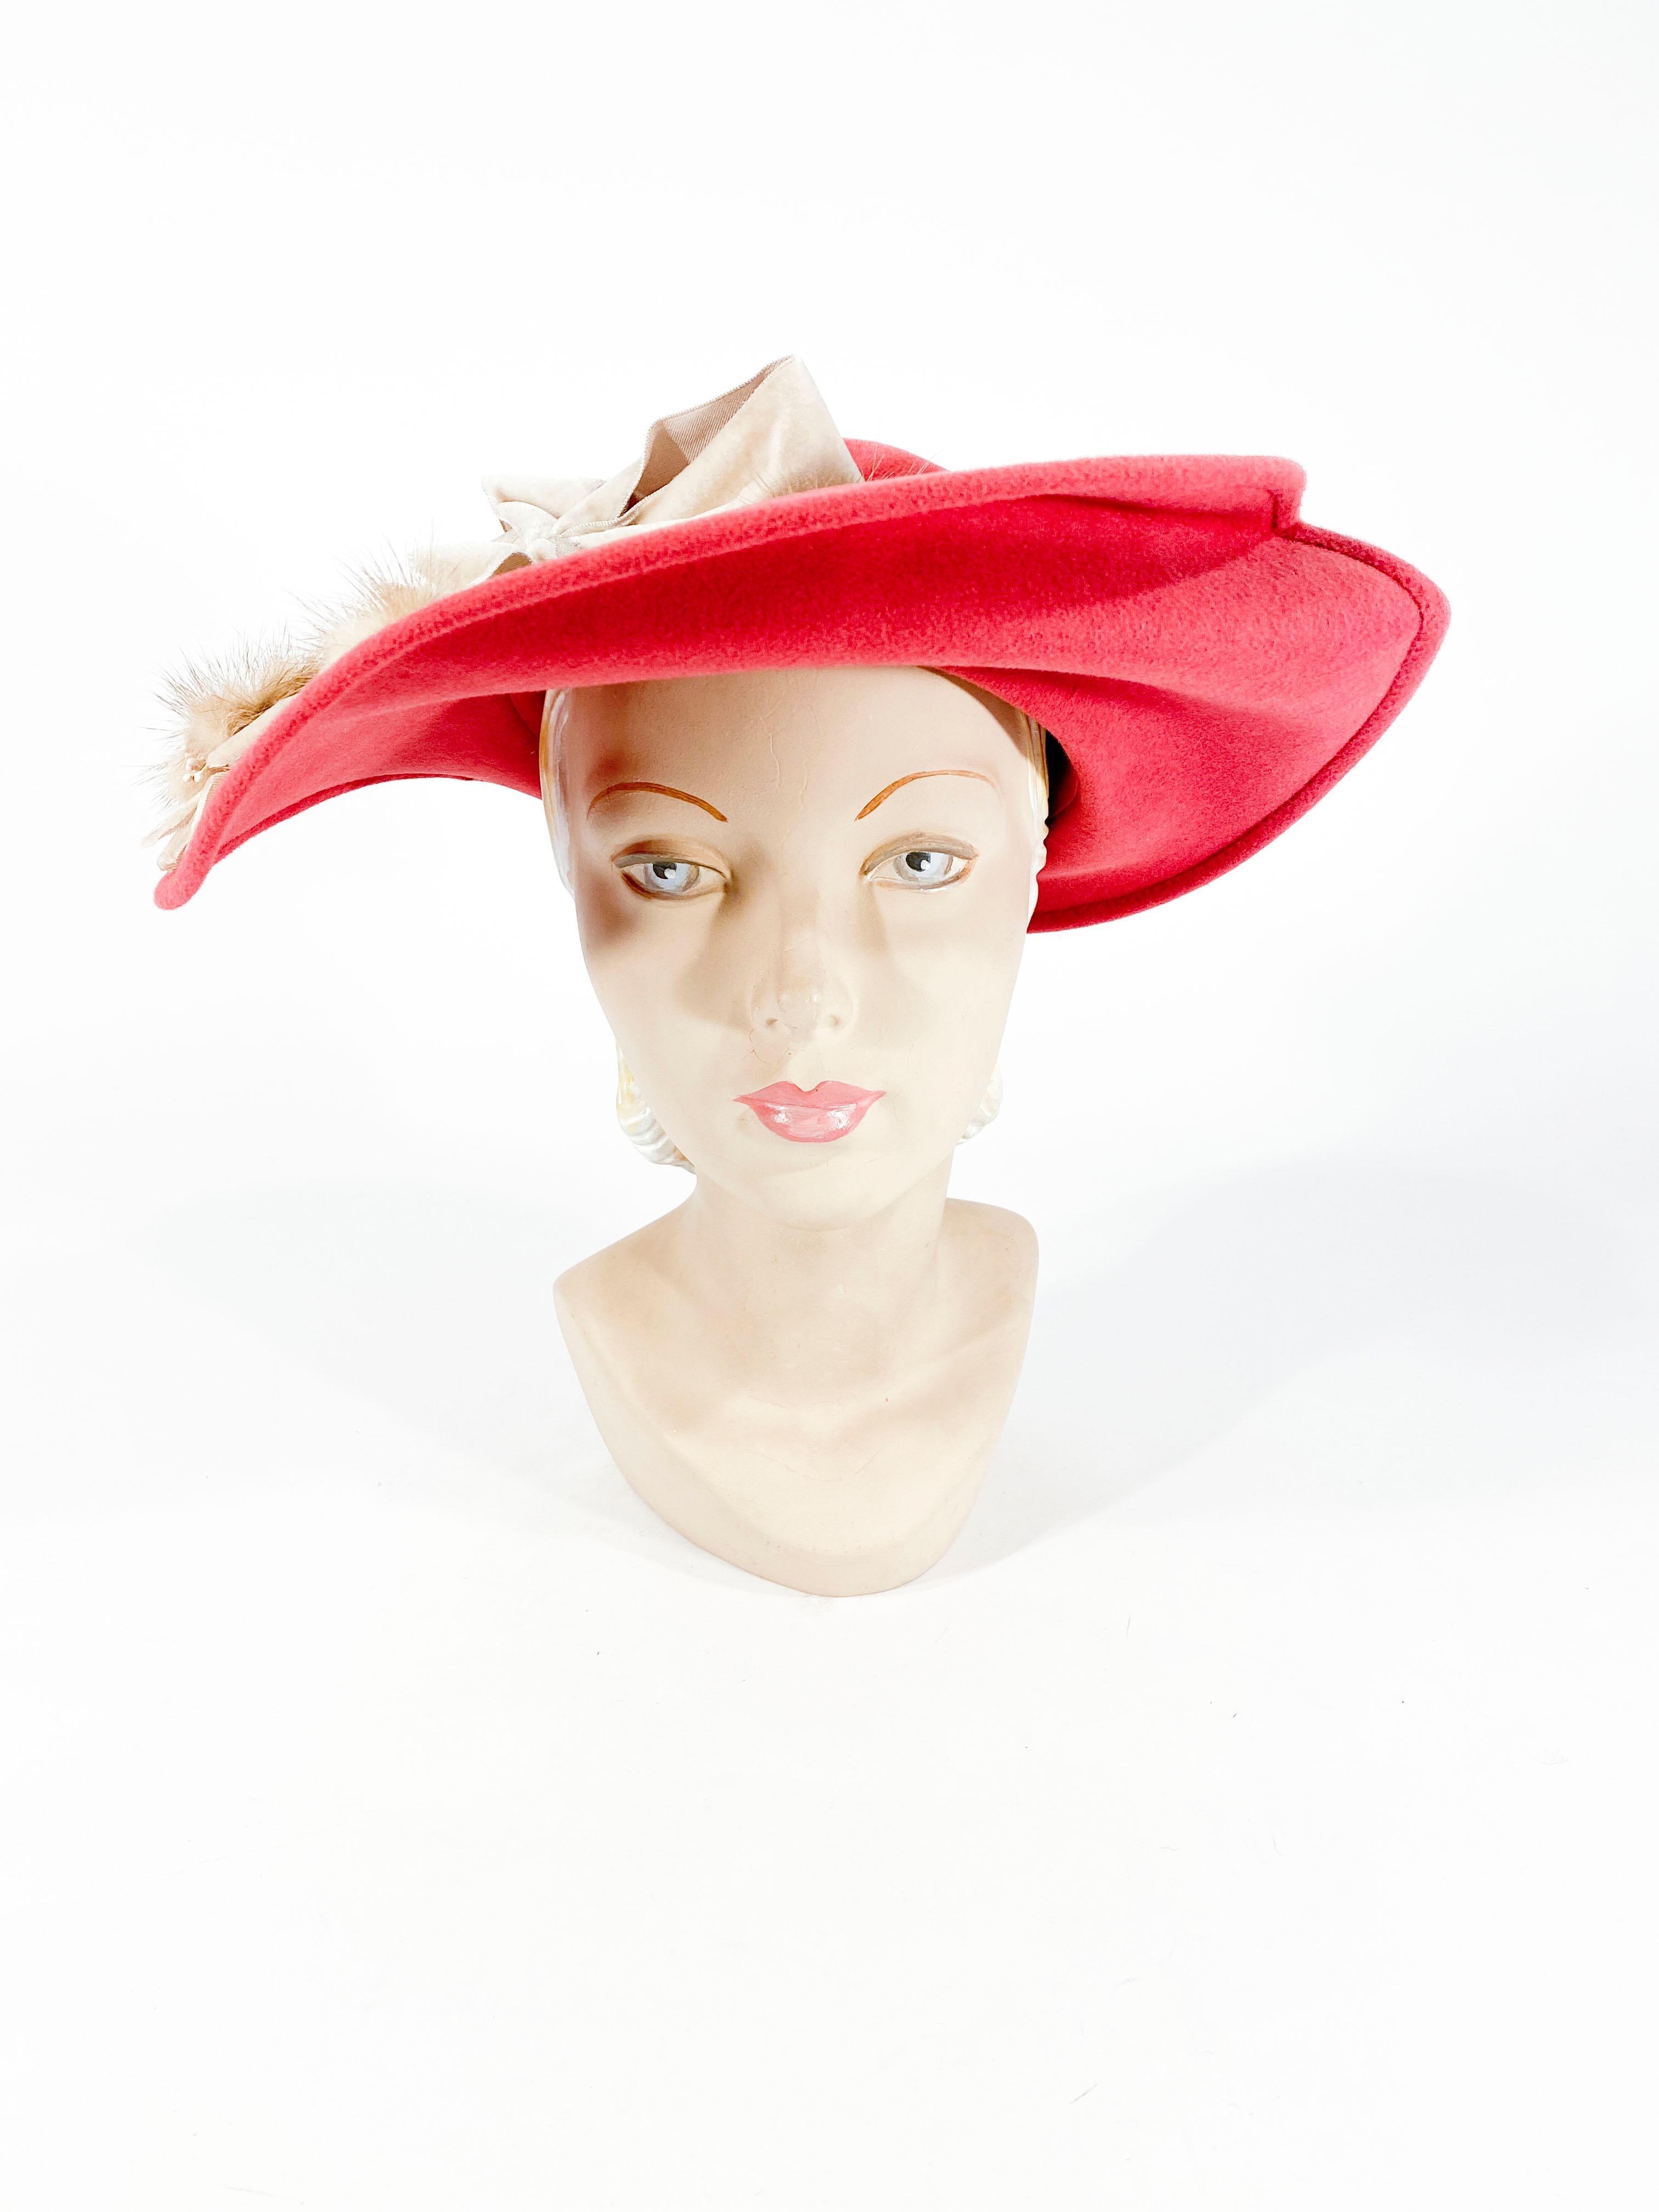 Late 1940s to early 1950s deep rose colored fur felt picture hat with a wide brim hand sculpted into an asymmetrical frame. The crown of the hat has a velvet bow adorned with velvet and mink flowers that decorated the entire side of the brim.